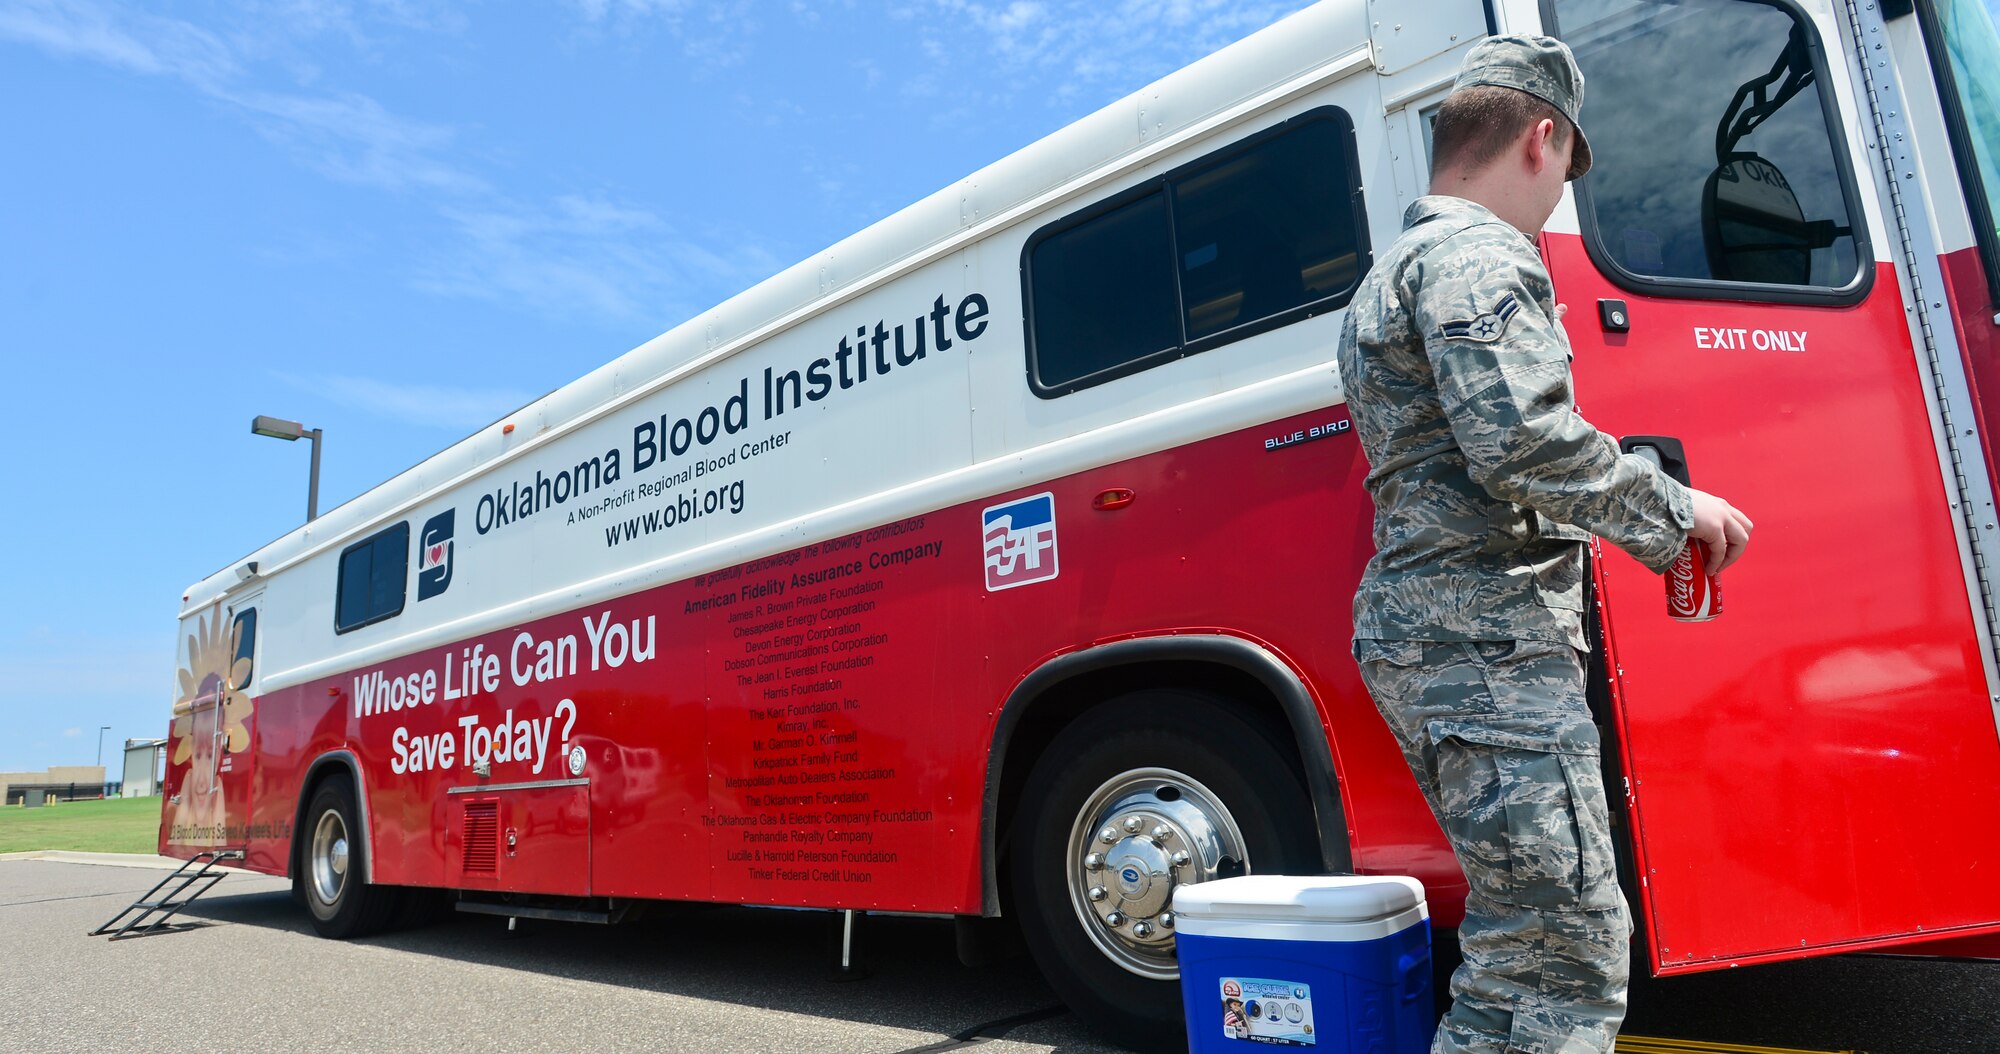 Airman 1st Class Ryan Martin, a communications focal point operator in the 137th Communications Flight, exits an Oklahoma Blood Institute mobile blood donation unit August 2 at Will Rogers Air National Guard Base in Oklahoma City. Guard members were encouraged to donate during drill weekend  to the Oklahoma Blood Institute, an organization that supplies blood to hospitals in Oklahoma and surrounding areas. (U.S. Air Force photo by Airman 1st Class Tyler Woodward/released) 